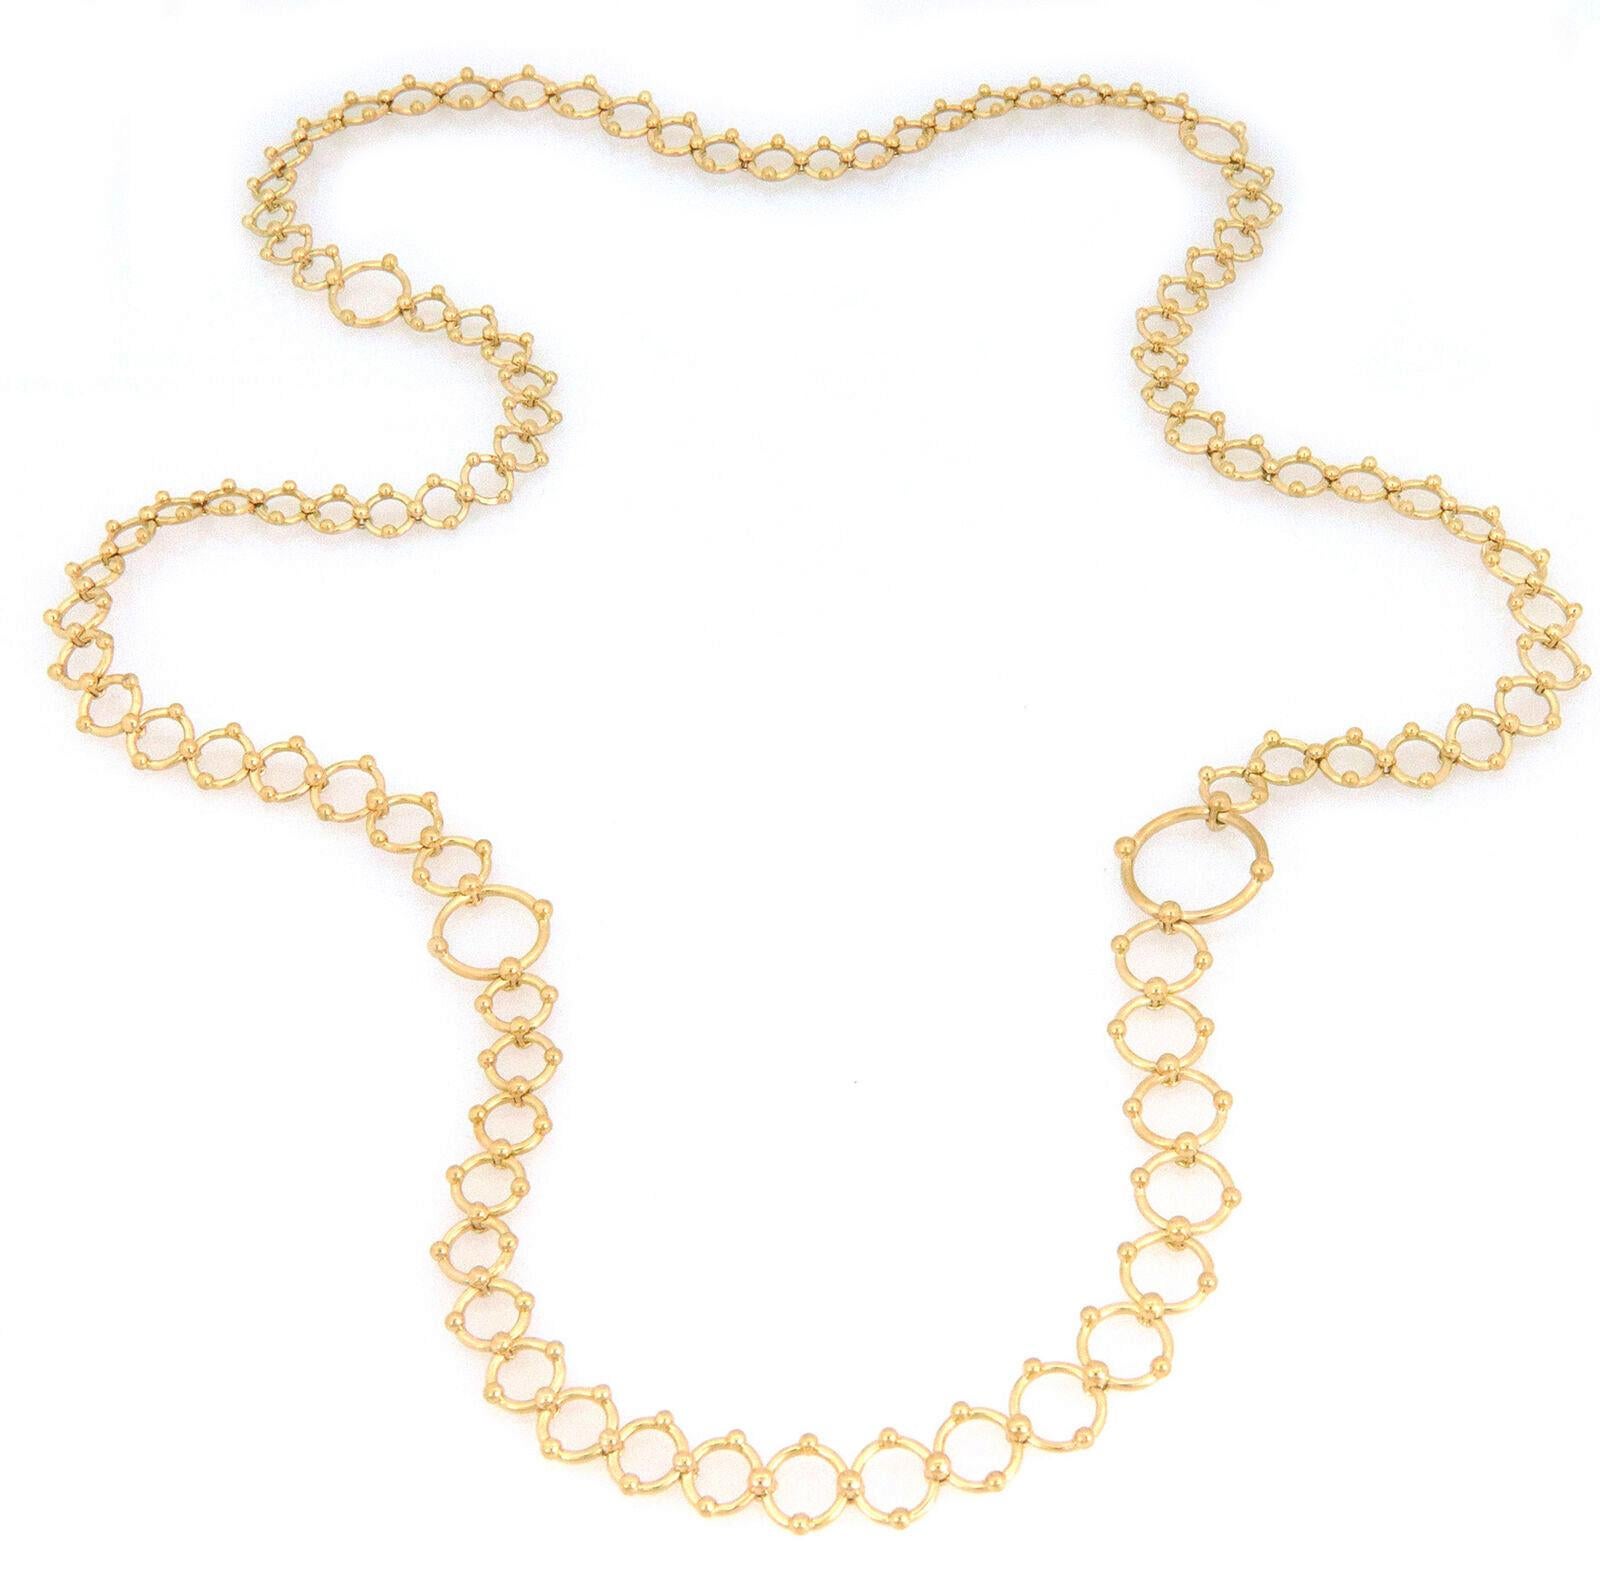 This is a gorgeous authentic necklace from Tiffany & Co. Crafted from 18k yellow gold with a fine polished finish featuring assorted open ring links, each joined together by a double side fine bead clamp, the long necklace has one large ring link